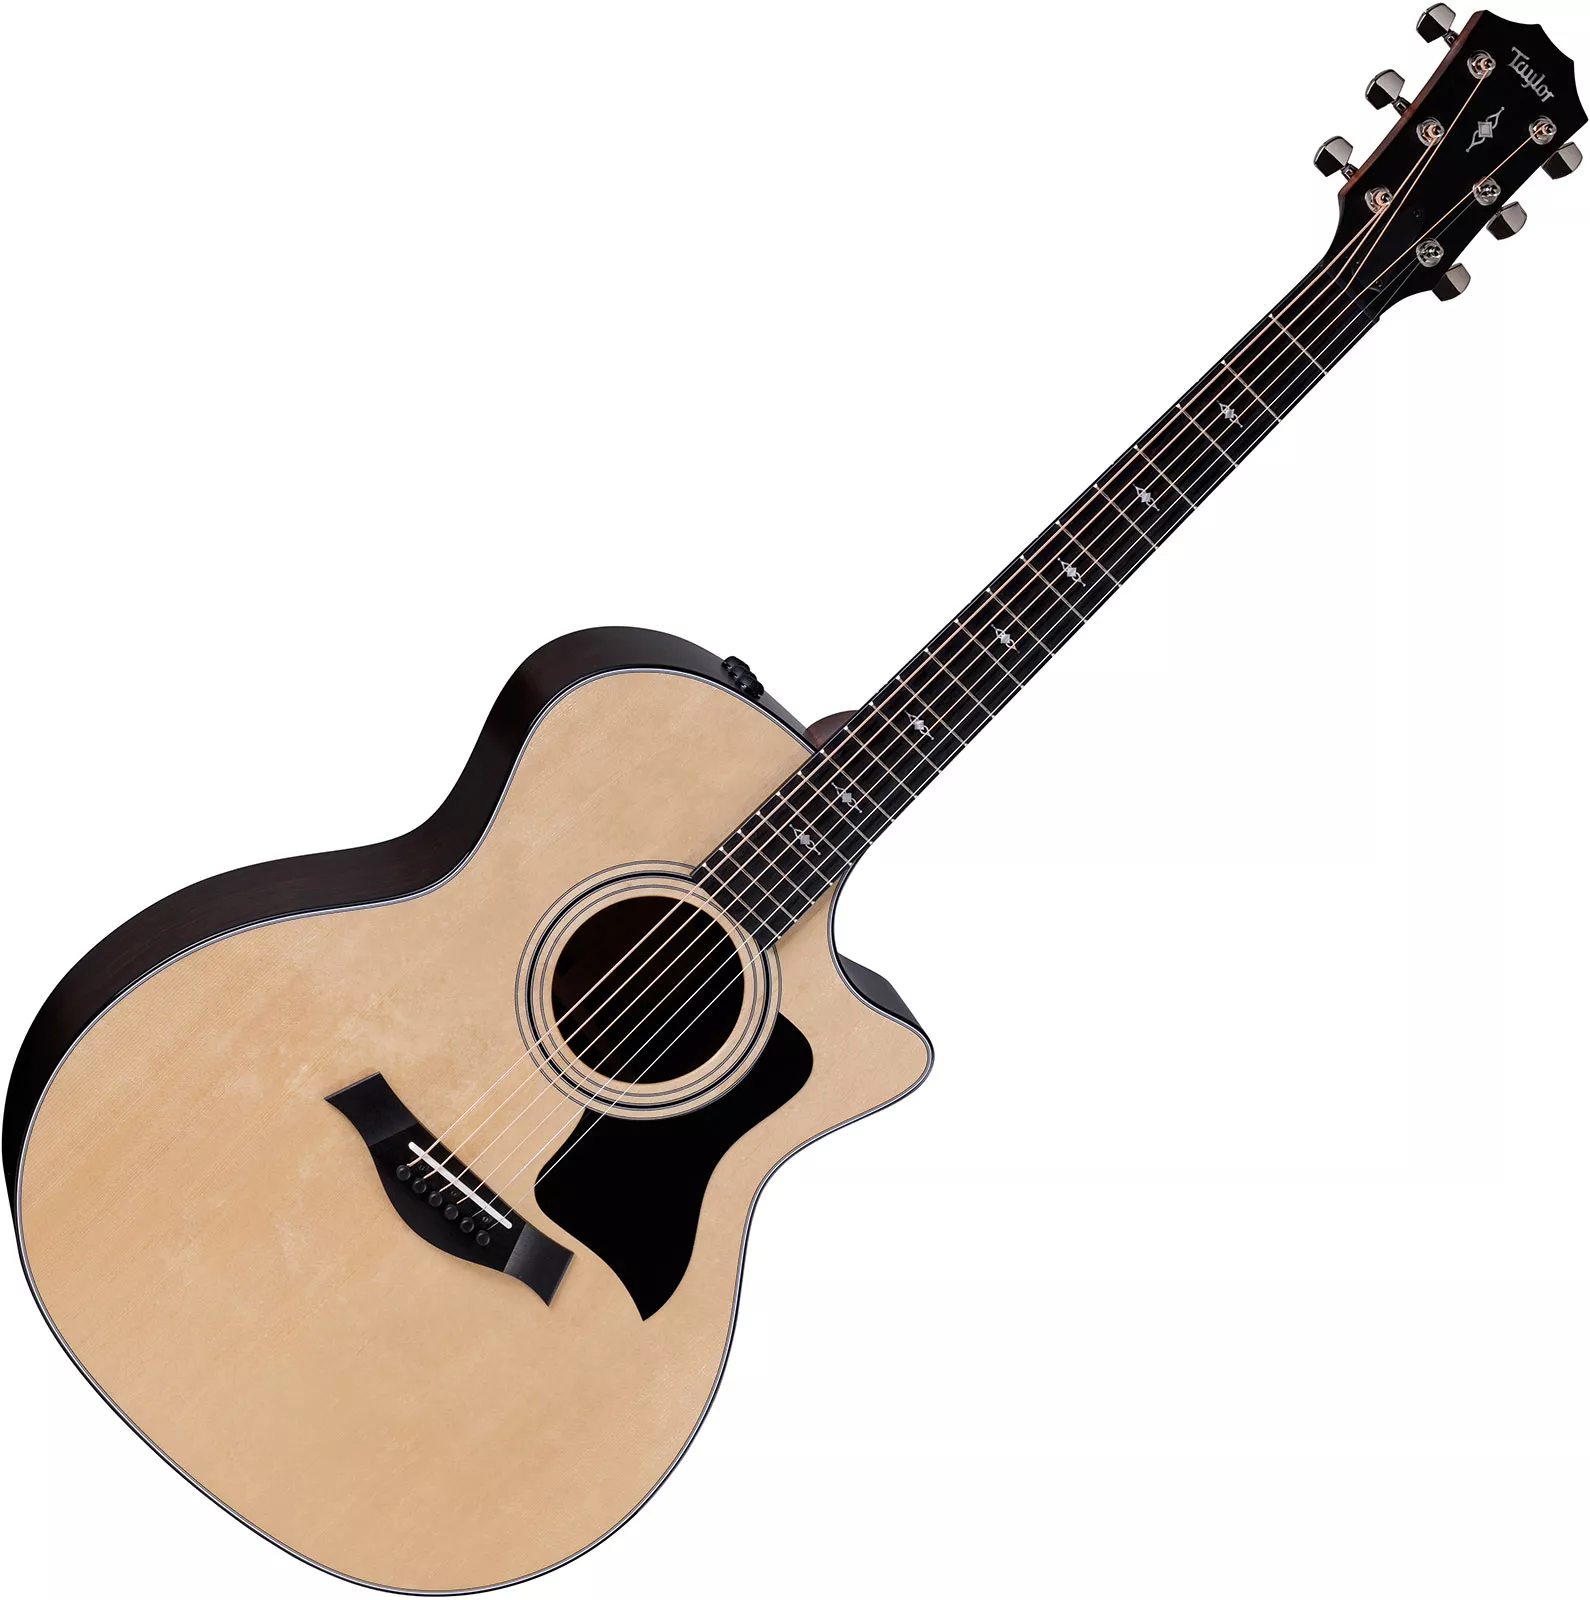 314ce Special Edition Sitka/Rosewood - natural Electro acoustic